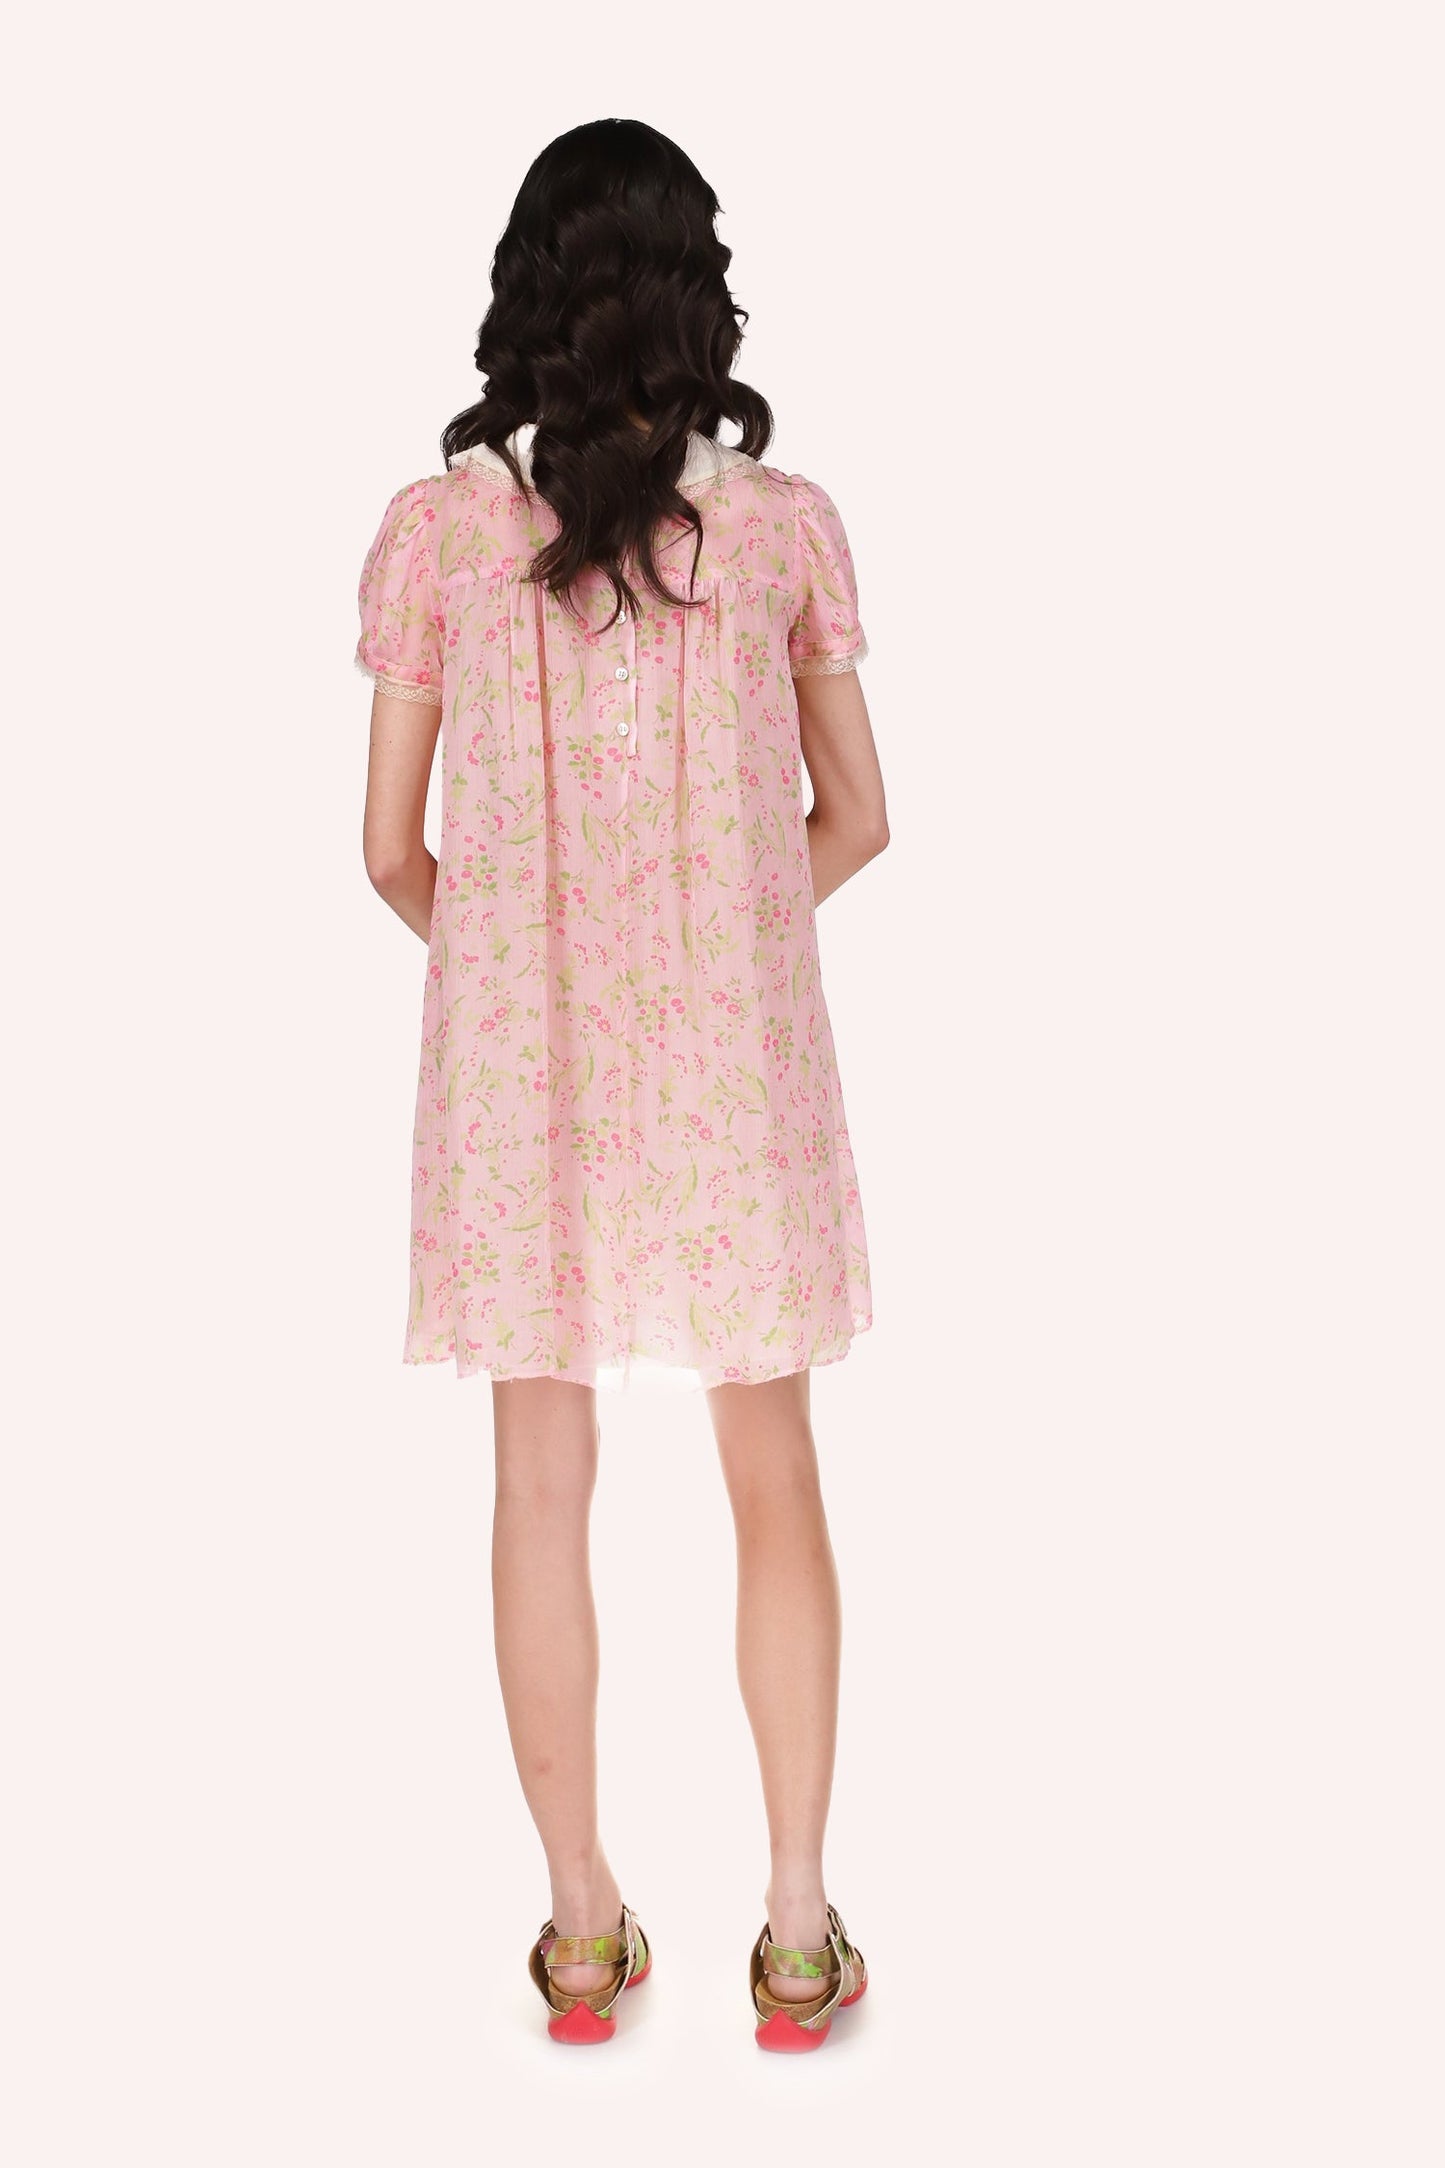 Babydoll Dress baby pink with floral pattern, with 3-pans ruffles effect from shoulders down